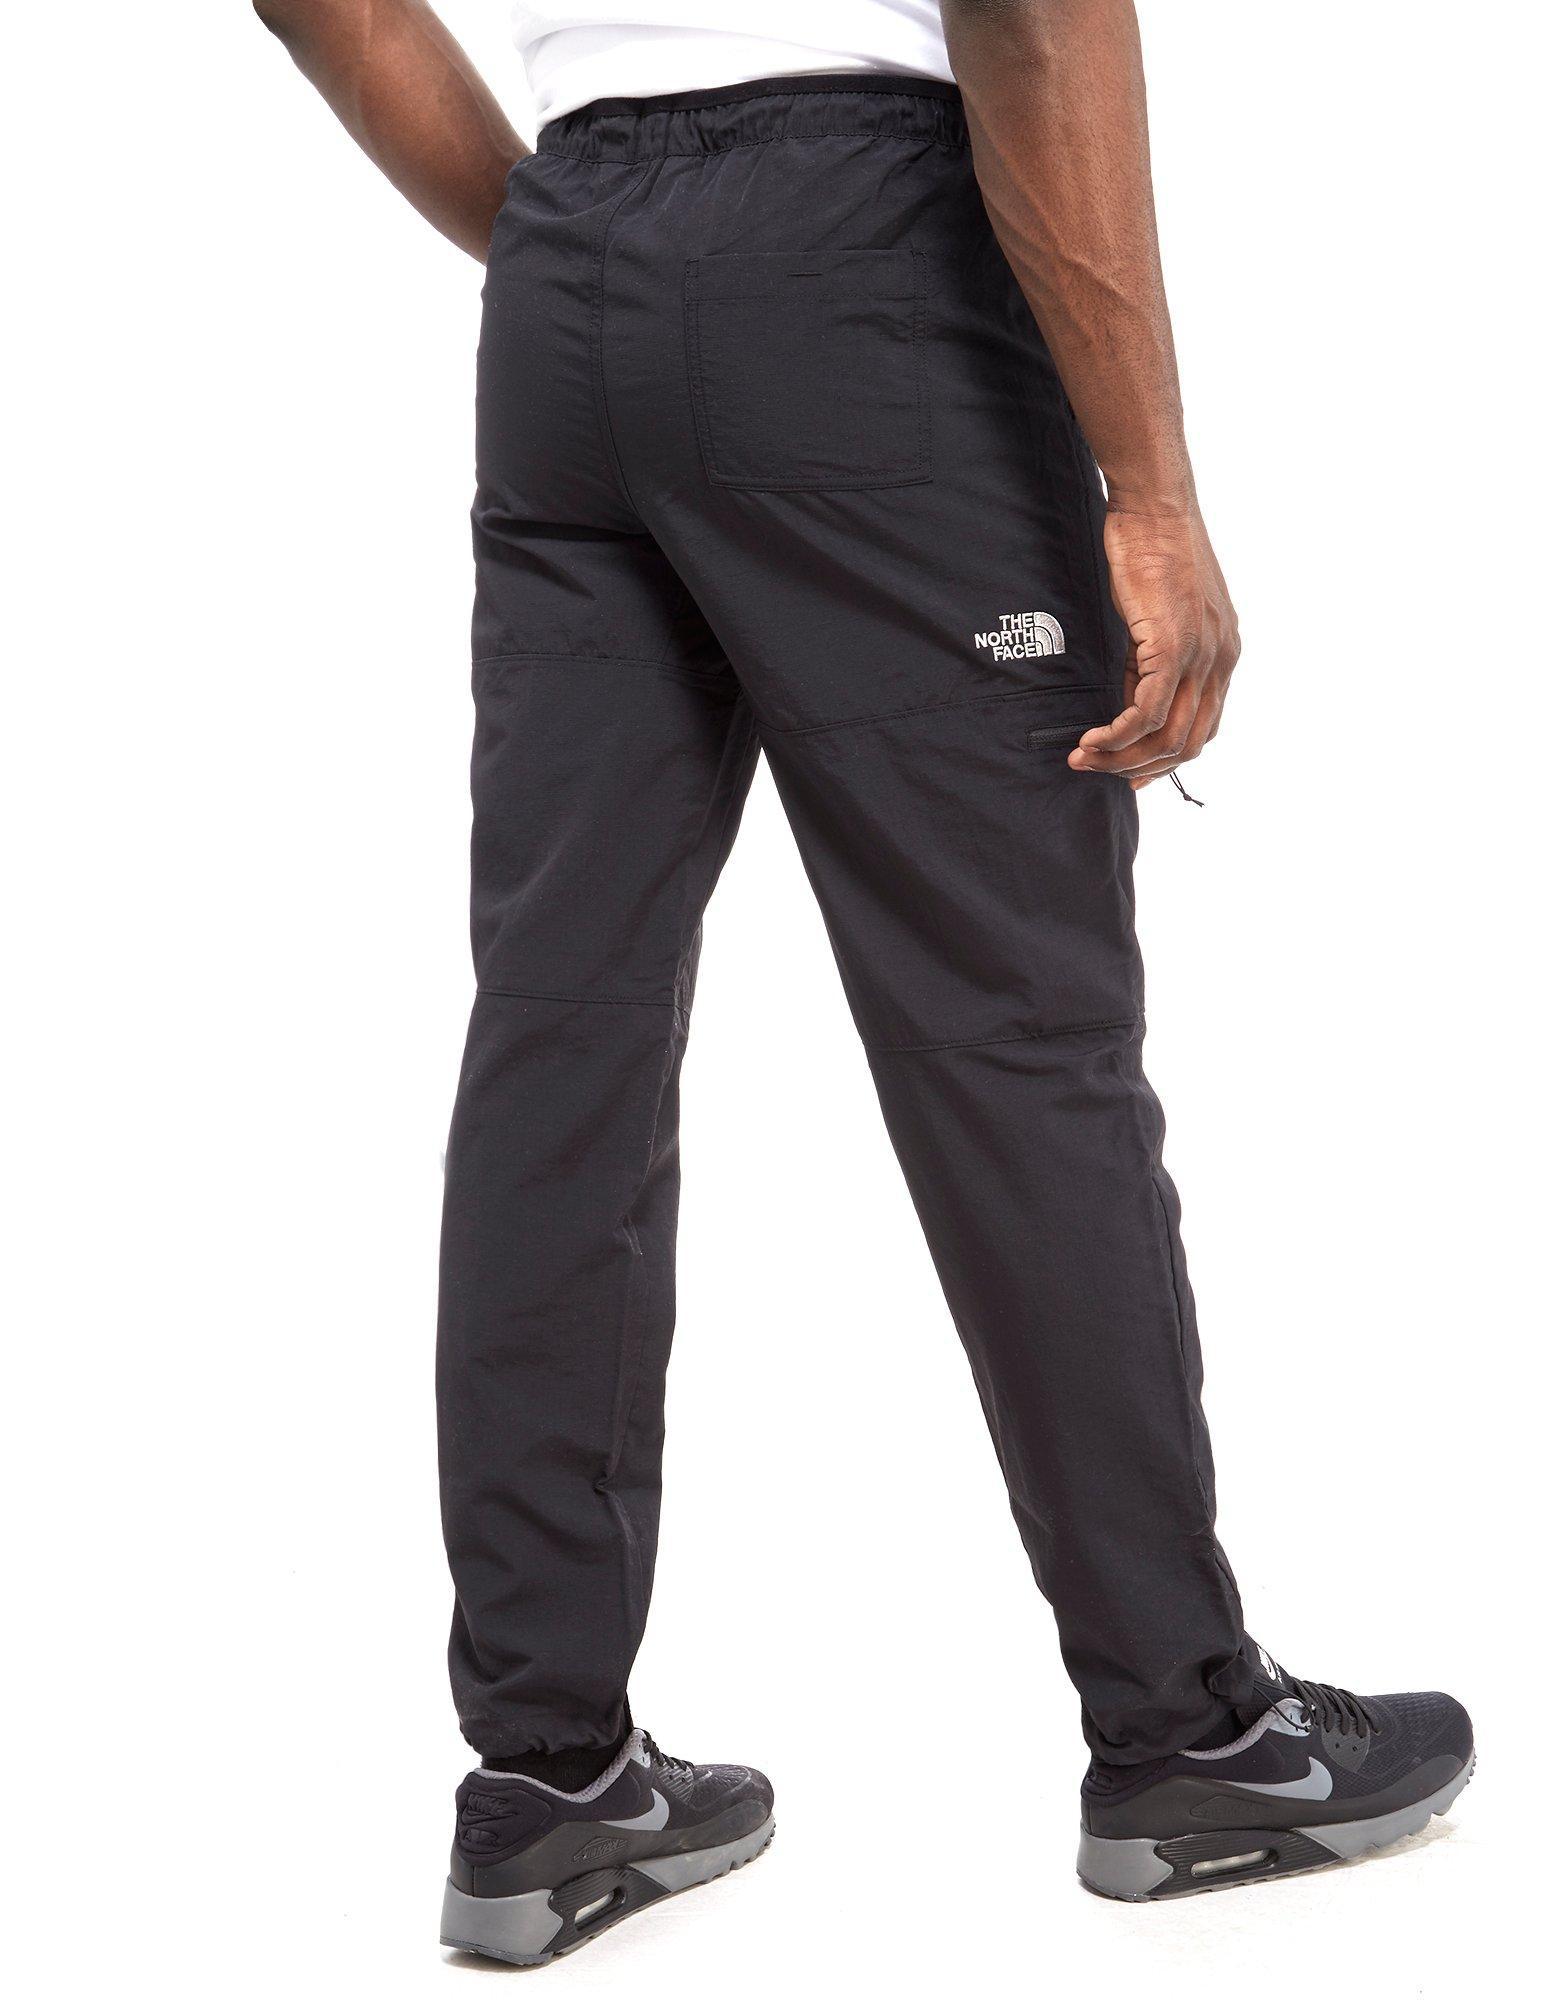 Lyst - The North Face Woven Pants in Black for Men